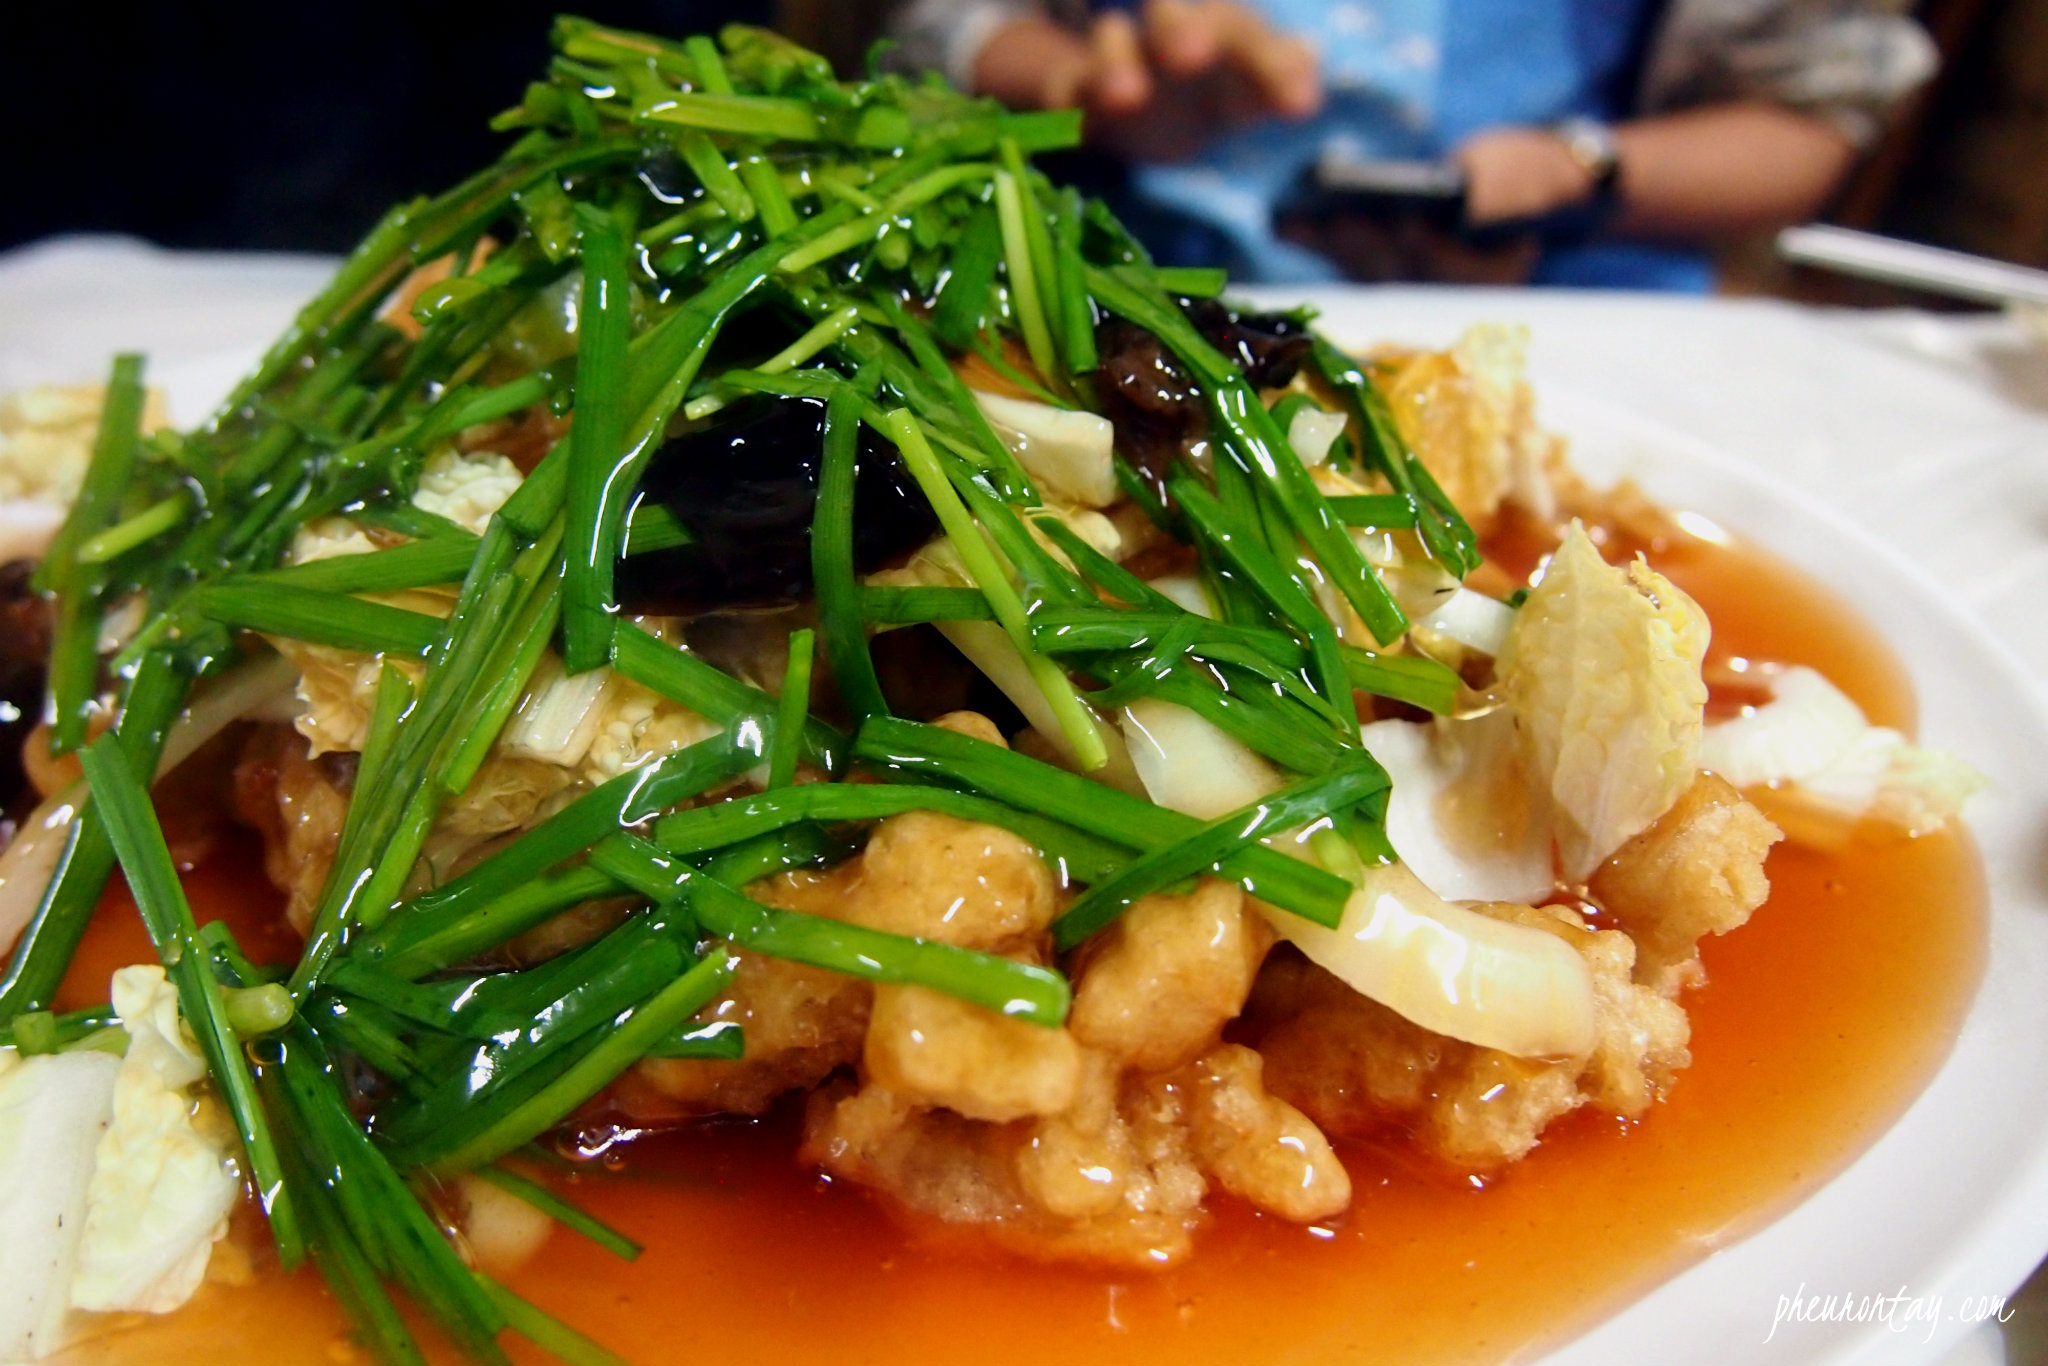 Jintaewon The Best Tangsuyuk In Korea Pheuron Tay Singapore Lifestyle Travel Blog Since 2013 Learn how to make this delicious, sweet and tangy dish vegan! pheuron tay